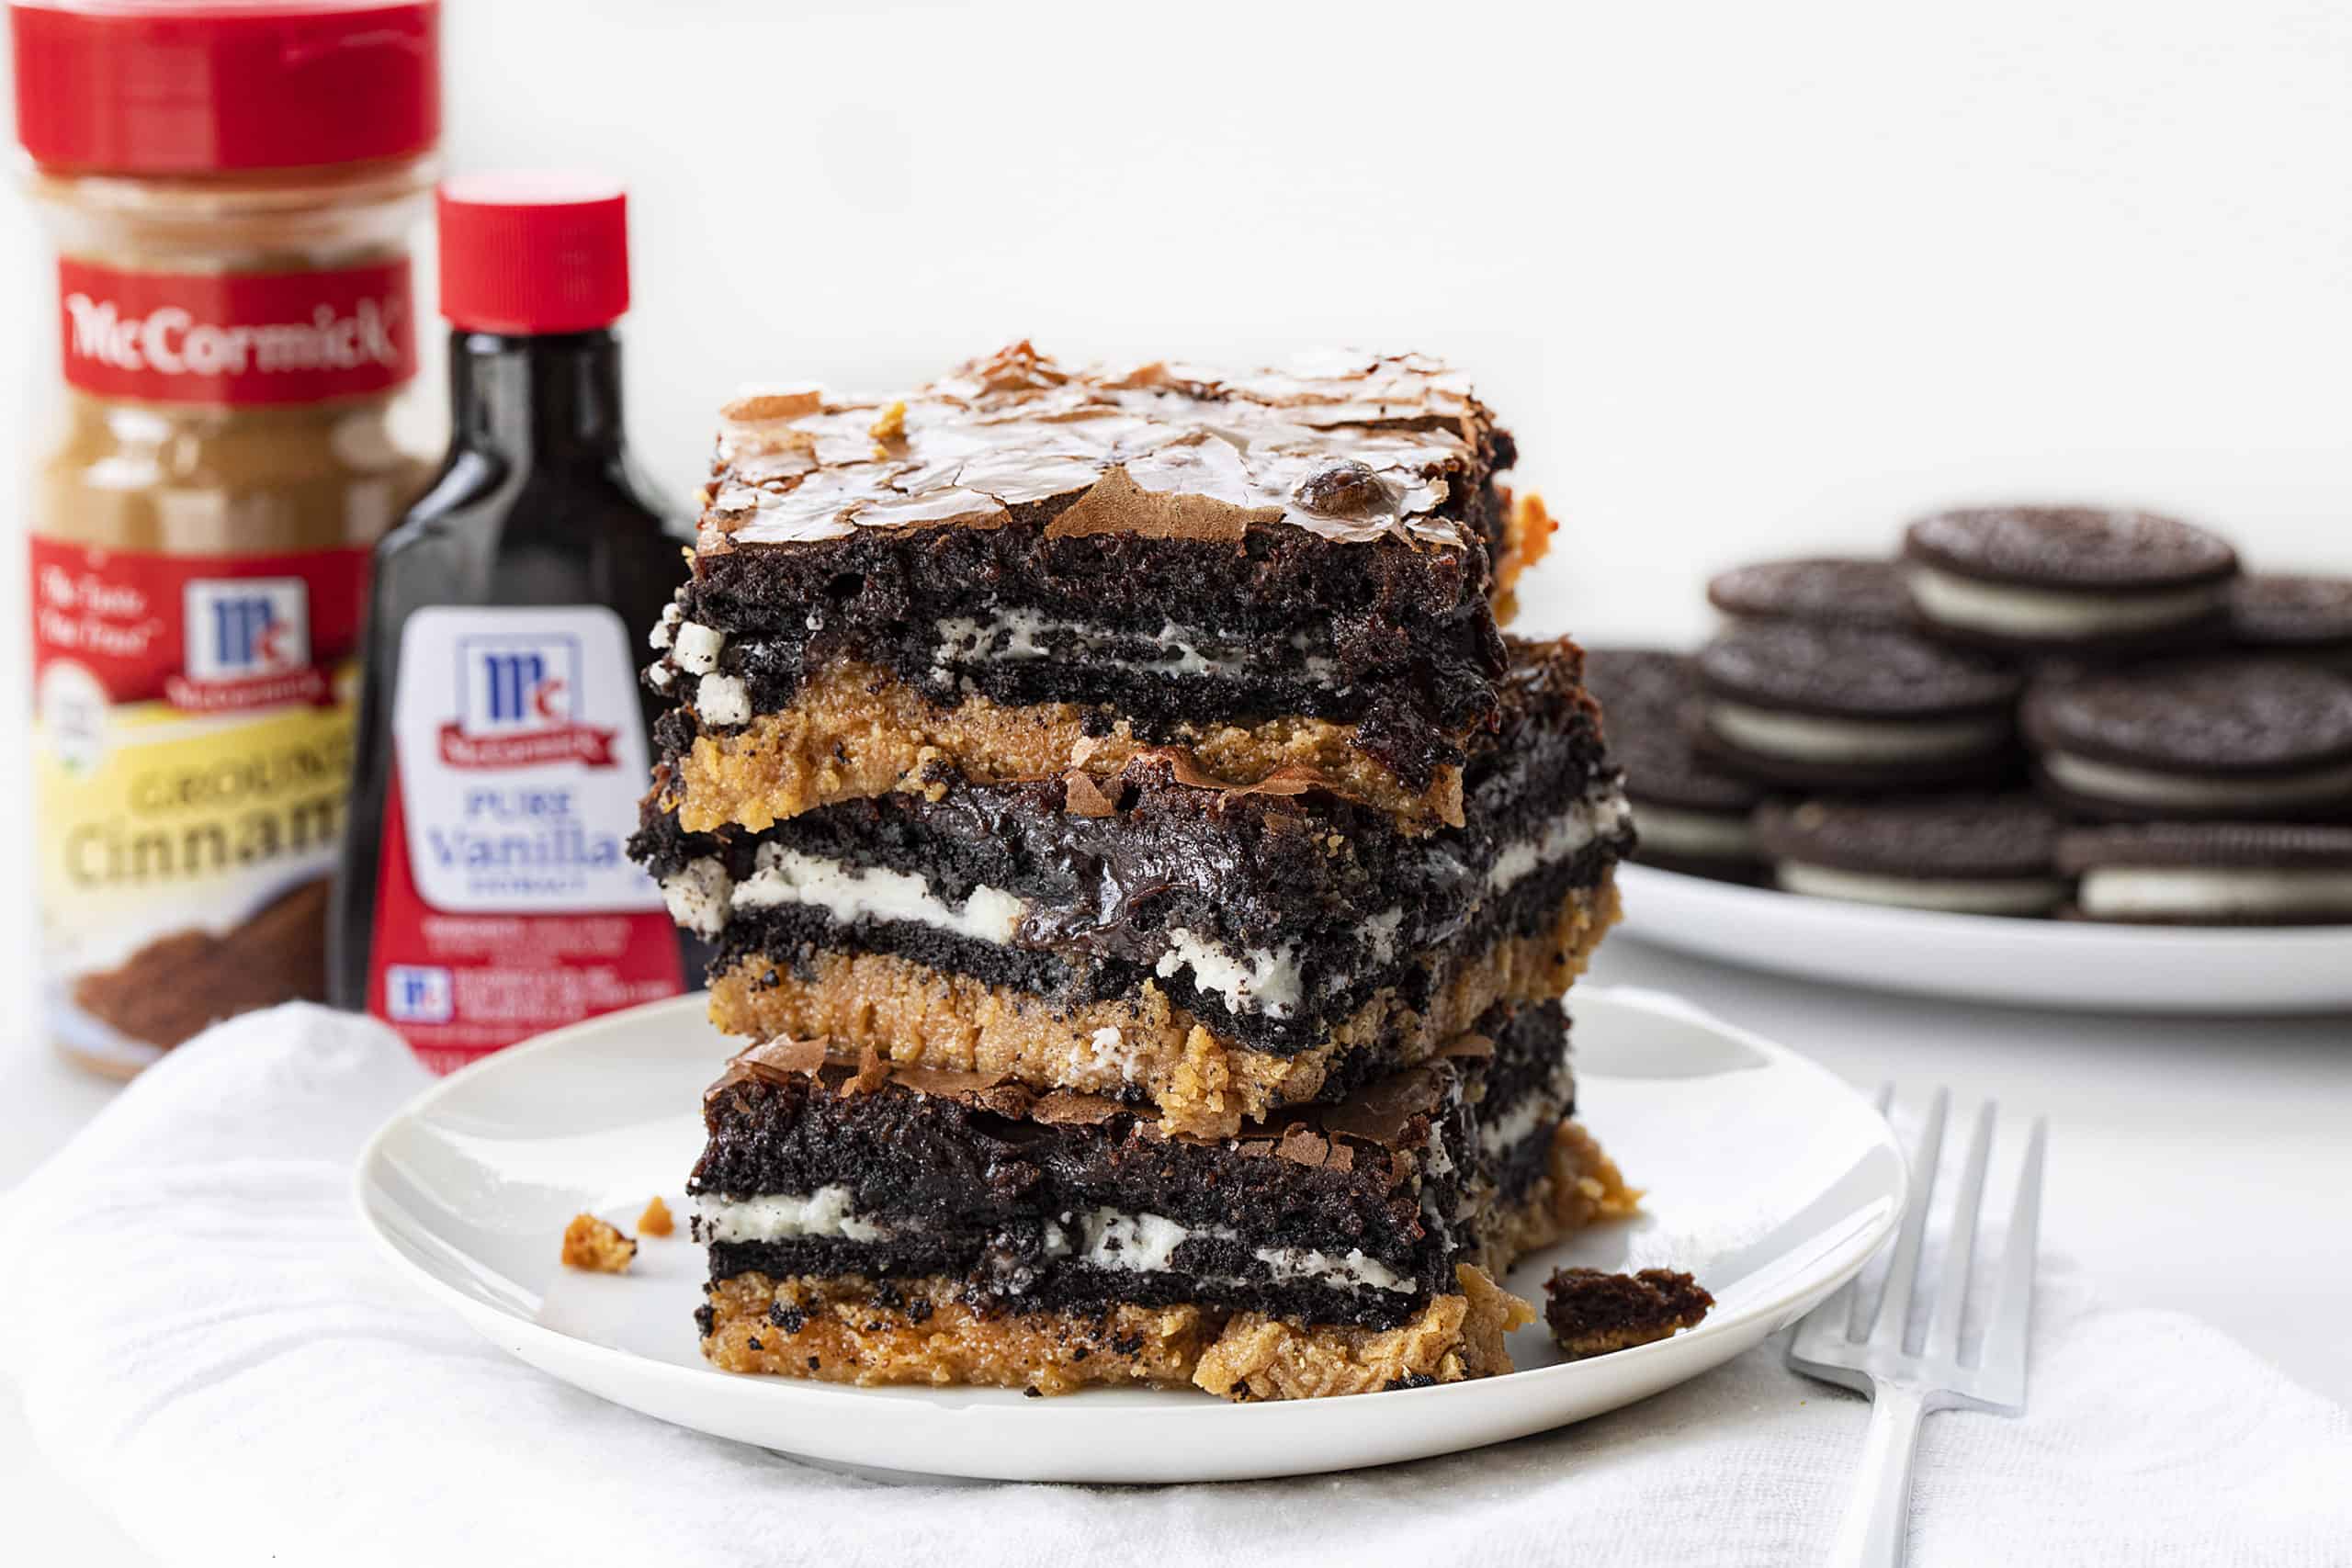 Stack of Peanut Butter Slutty Brownies with Oreos and Vanilla and Cinnamon in the Background